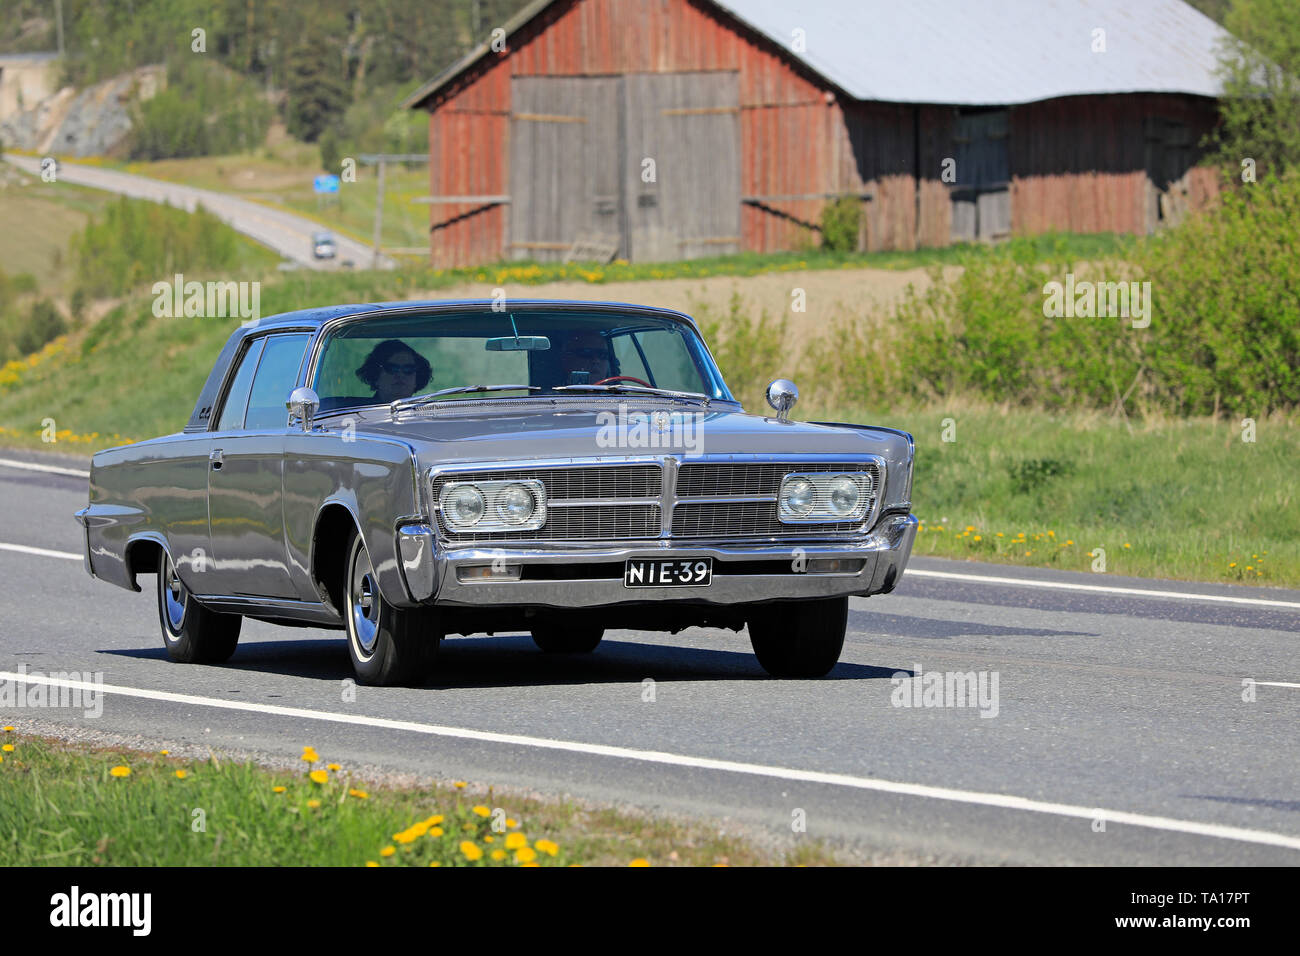 Salo, Finland. May 18, 2019. Classic grey Imperial car, mid 1960s, on road along rural highway to participate in Salon Maisema Cruising 2019. Stock Photo